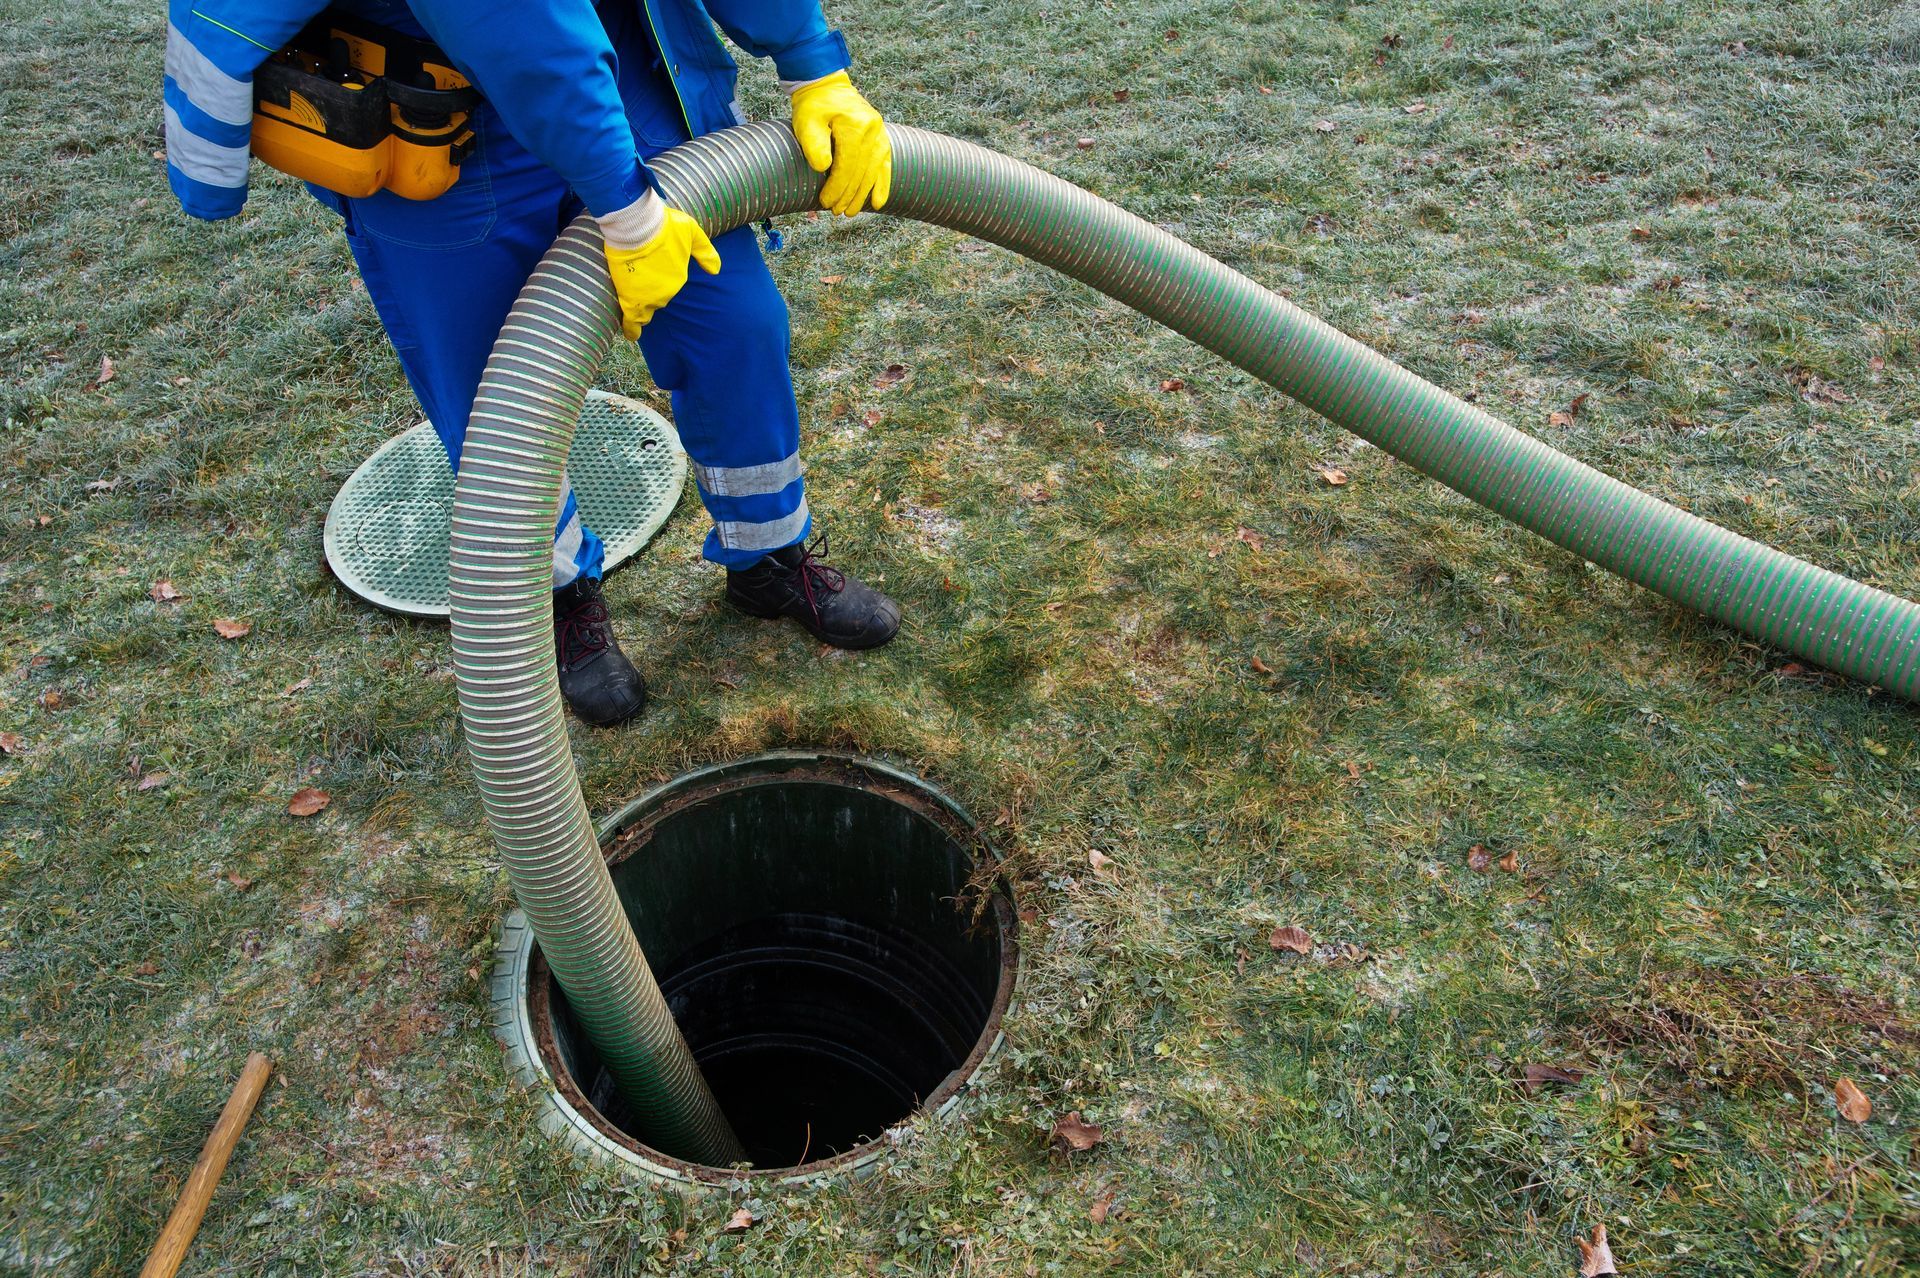 Worker emptying and cleaning a household septic tank to remove sludge and maintain the septic system.